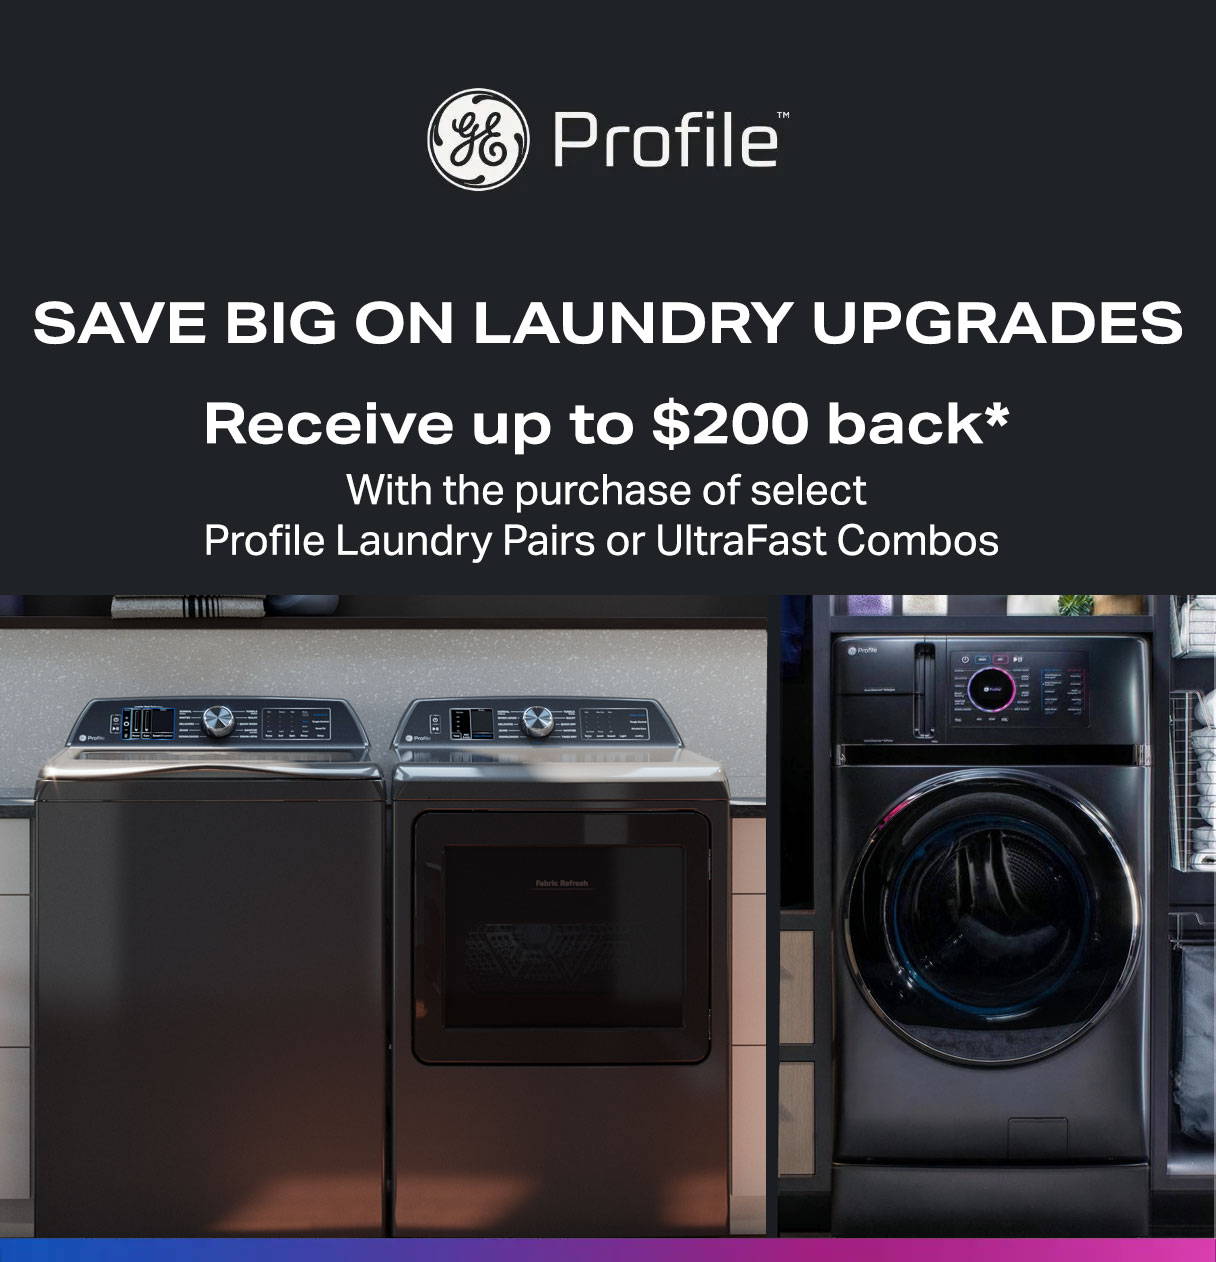 Save Big on Laundry Upgrades - Purchase select Profile Laundry Pairs or 1 UltraFast Combo and get $100 back or purchase 2 UltraFast Combos and get $200 back*